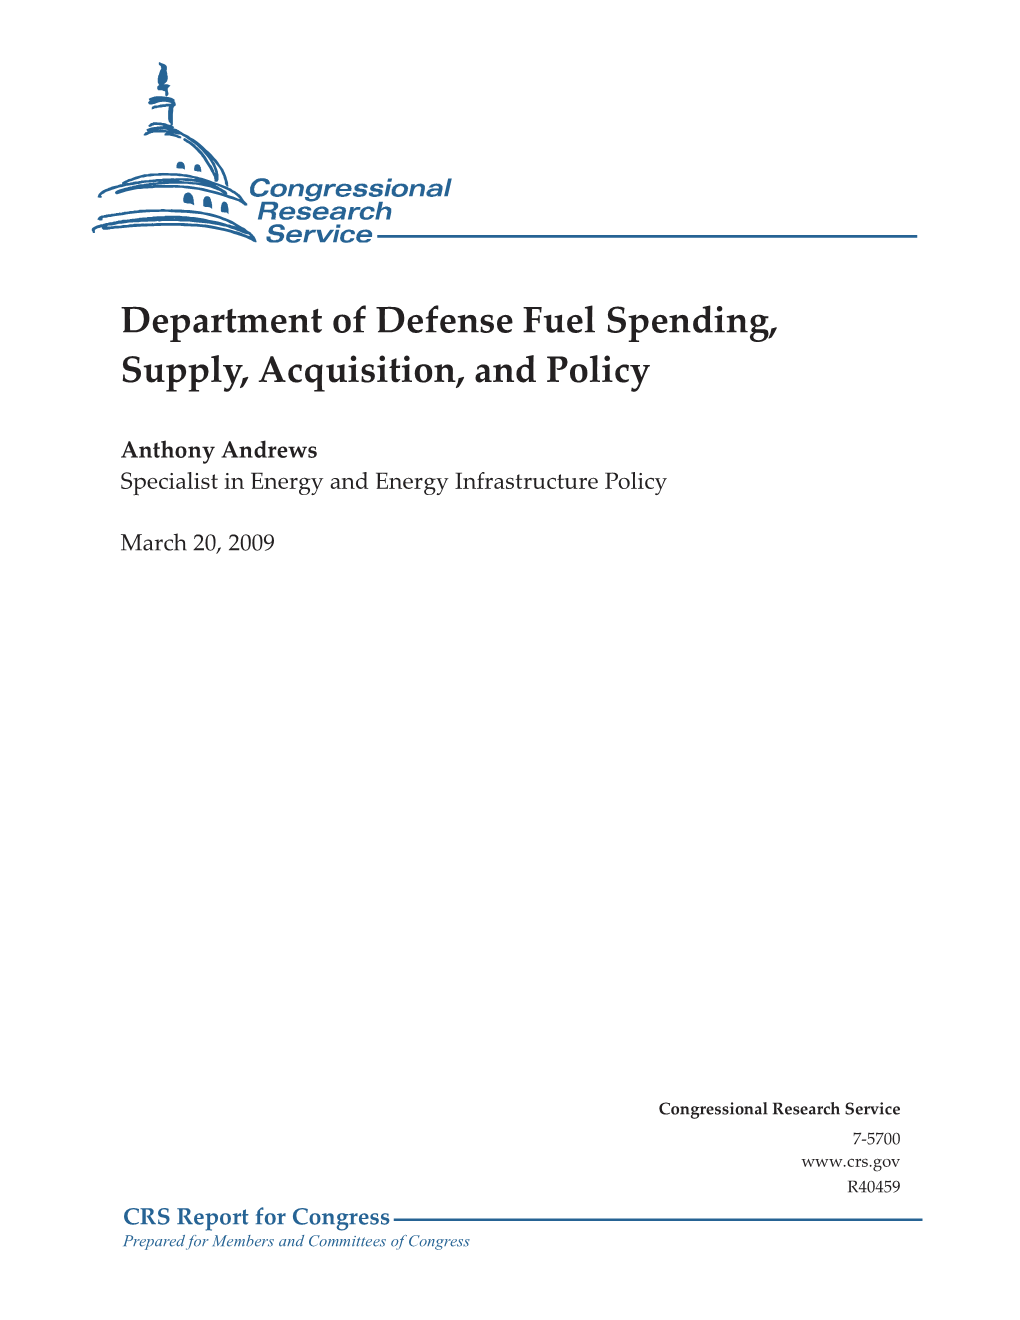 Department of Defense Fuel Spending, Supply, Acquisition, and Policy